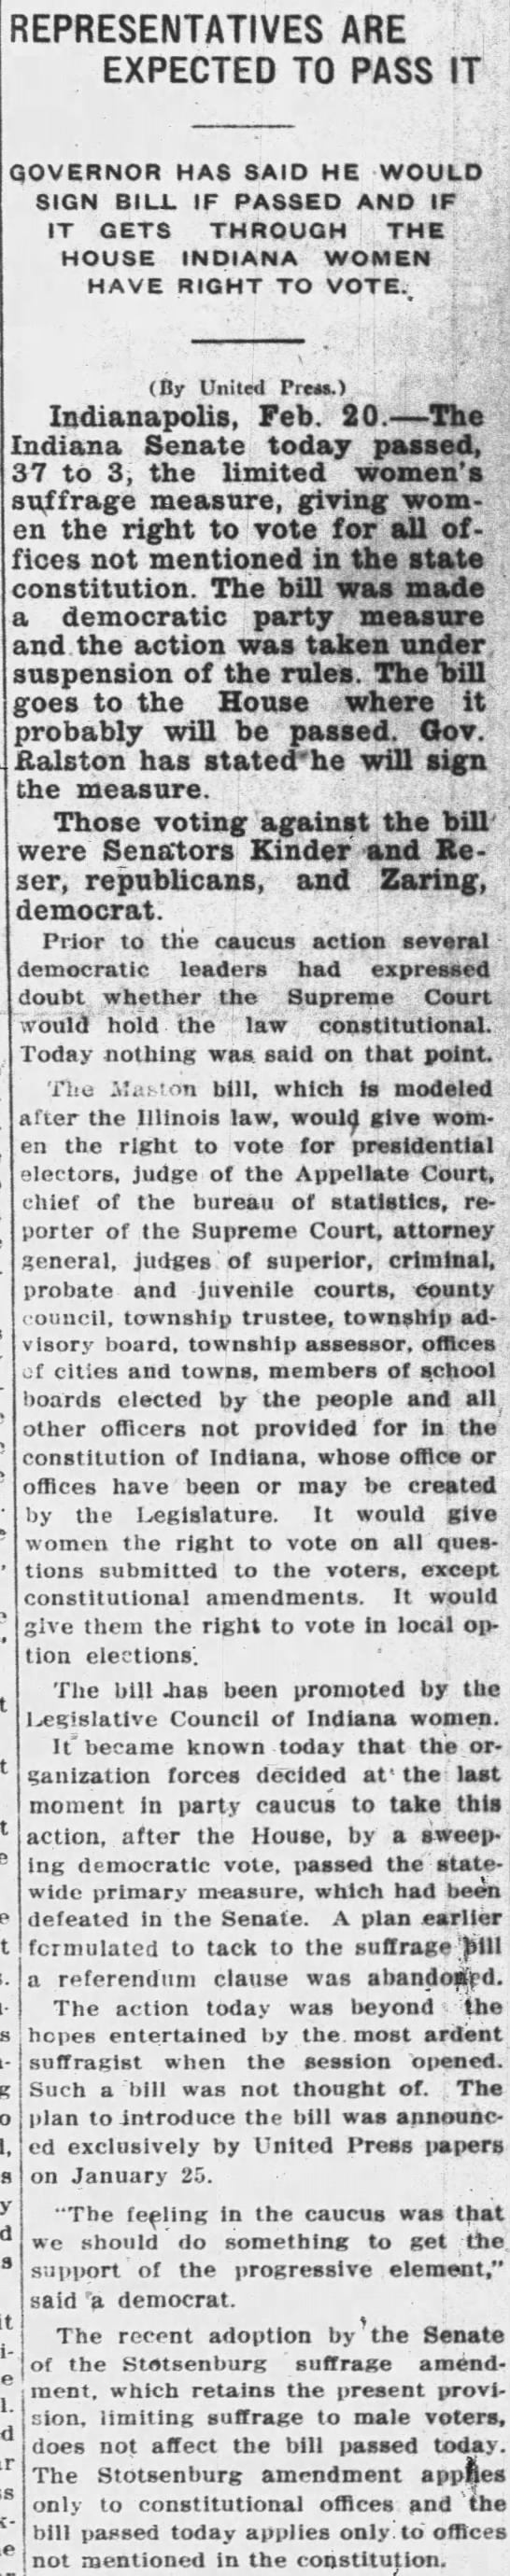 Indiana women are expected to get limited right to vote, 1915 - 